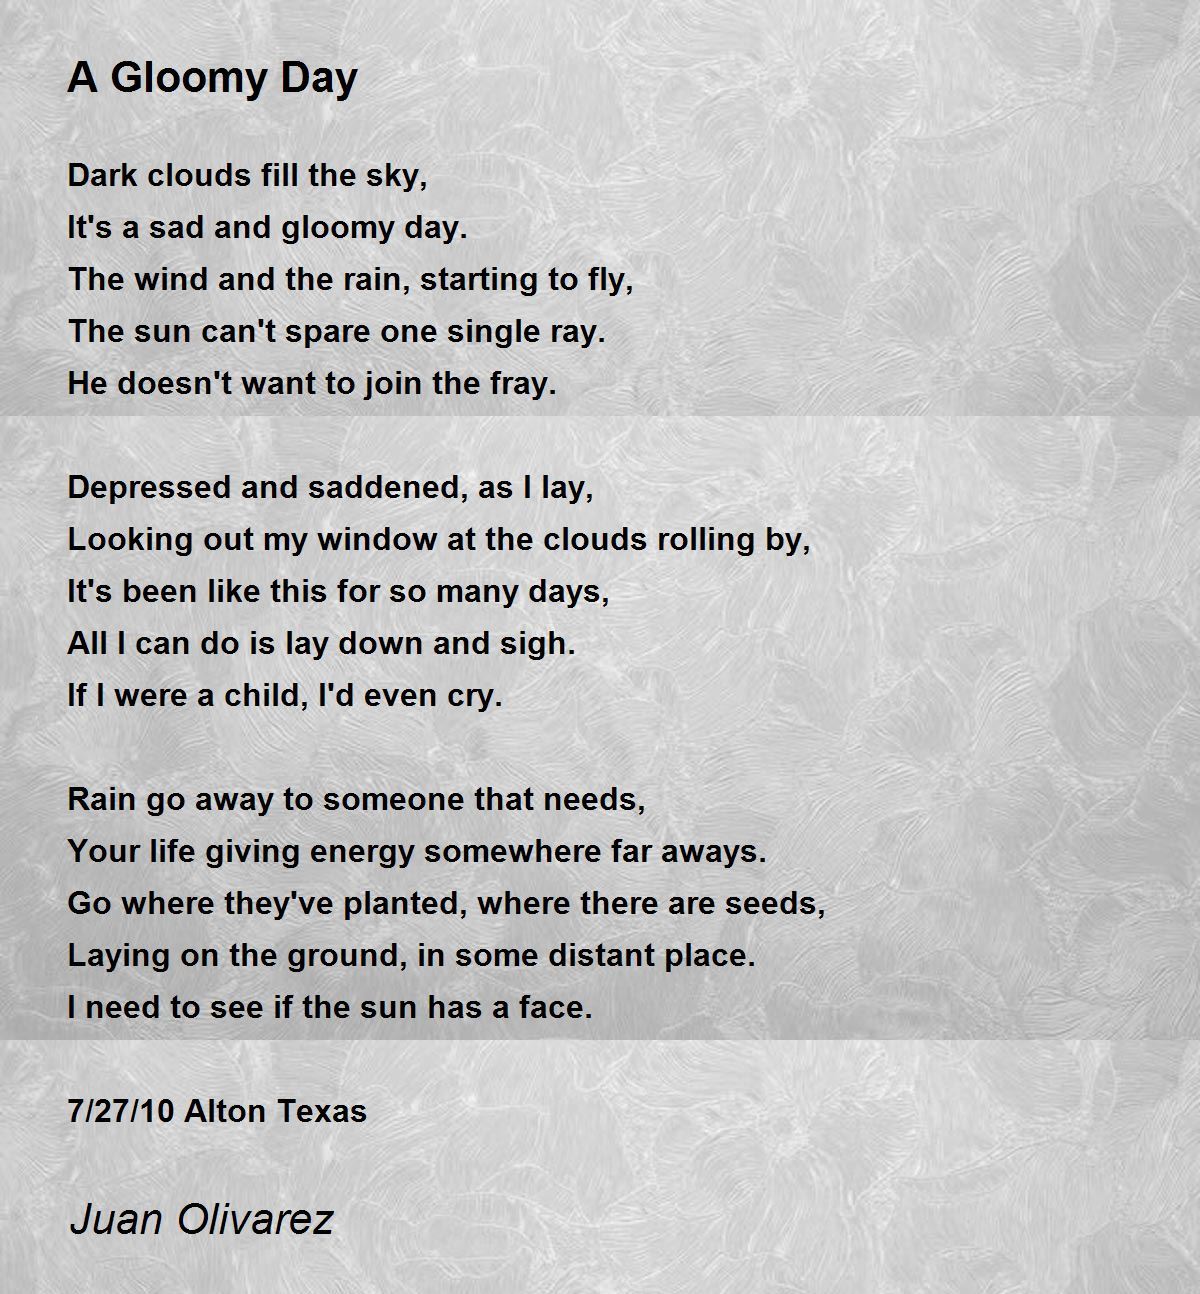 cloudy day poem